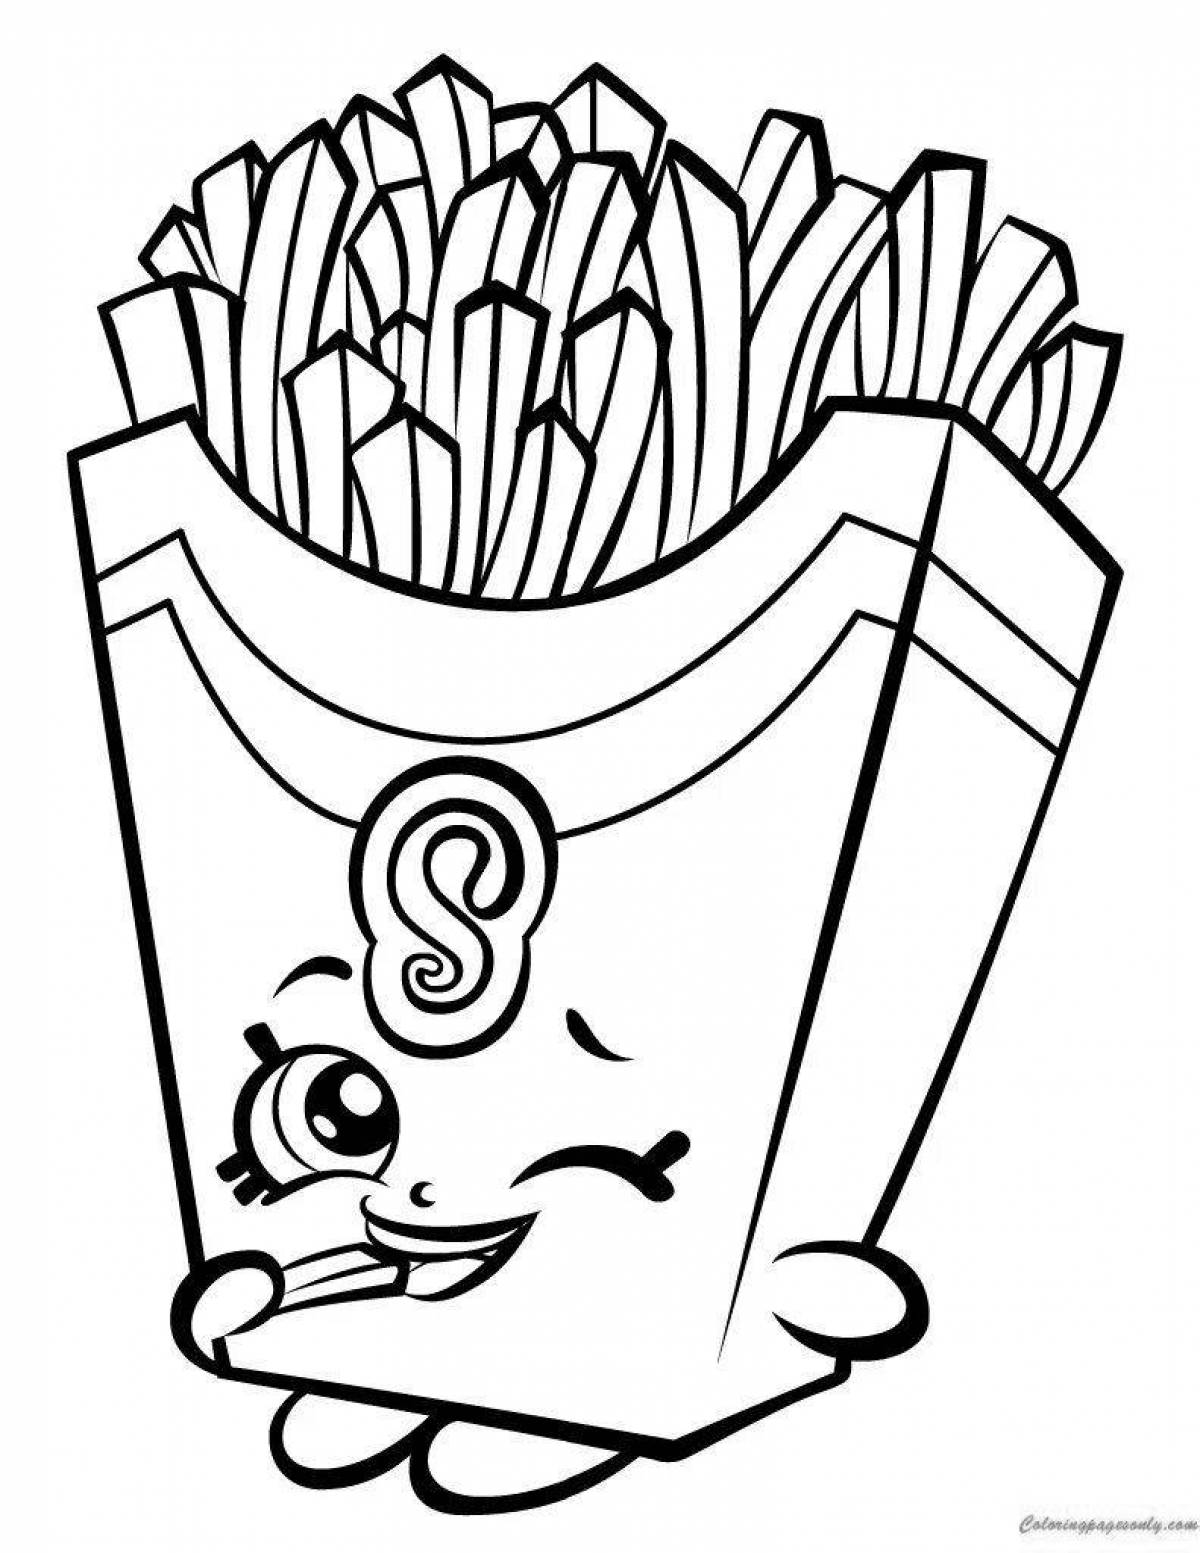 Nice coloring of french fries for kids